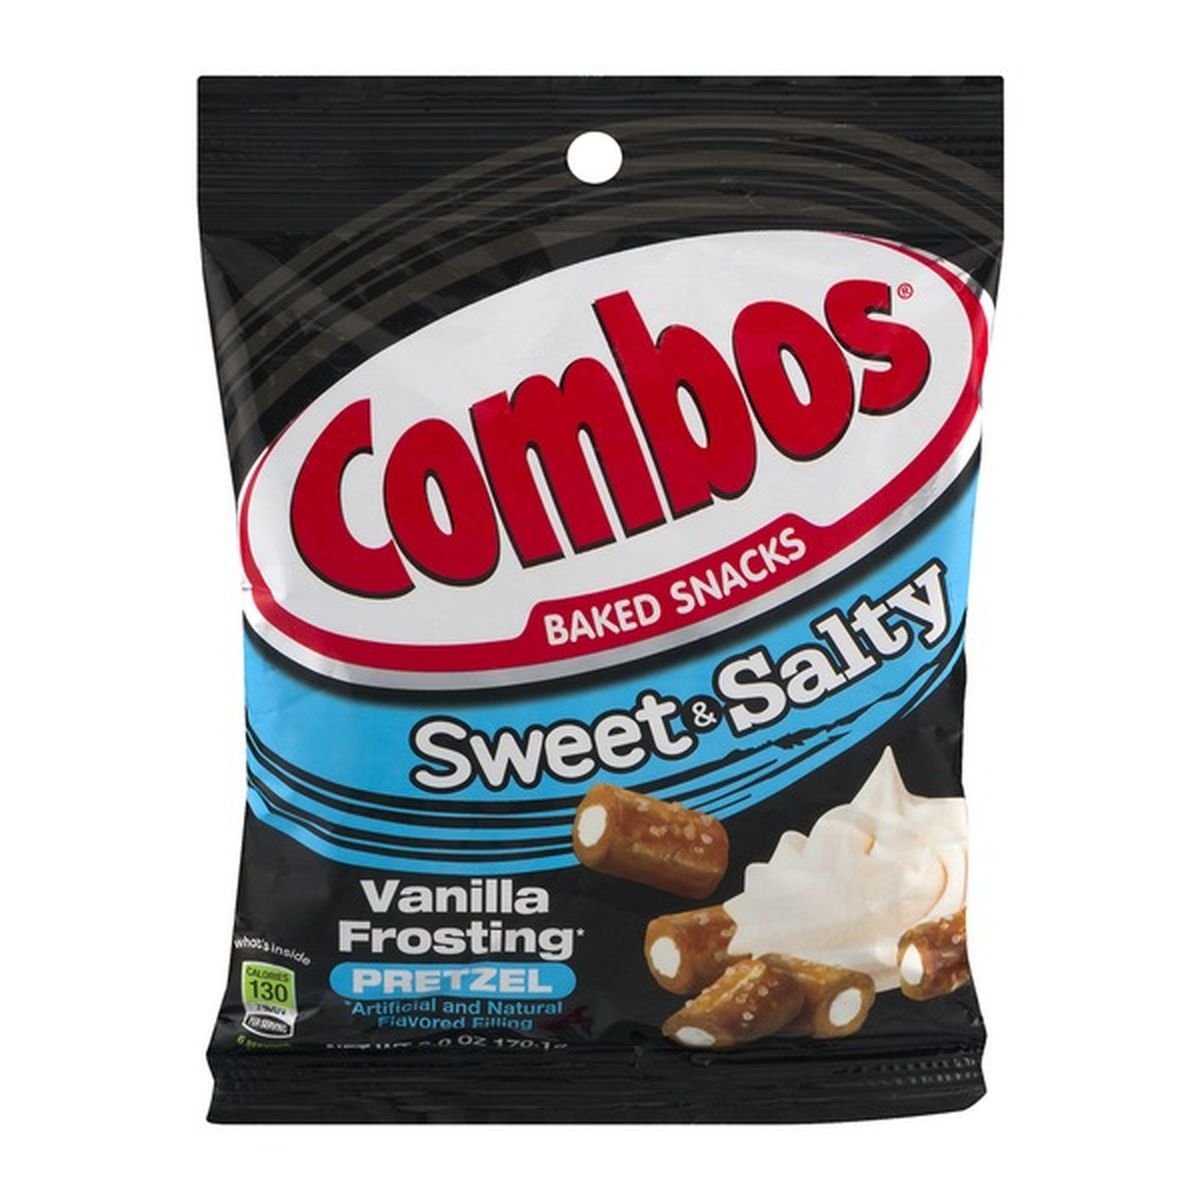 COMBOS Pretzel Sweet & Salty Vanilla Frosting (6 oz) Delivery or Pickup  Near Me - Instacart